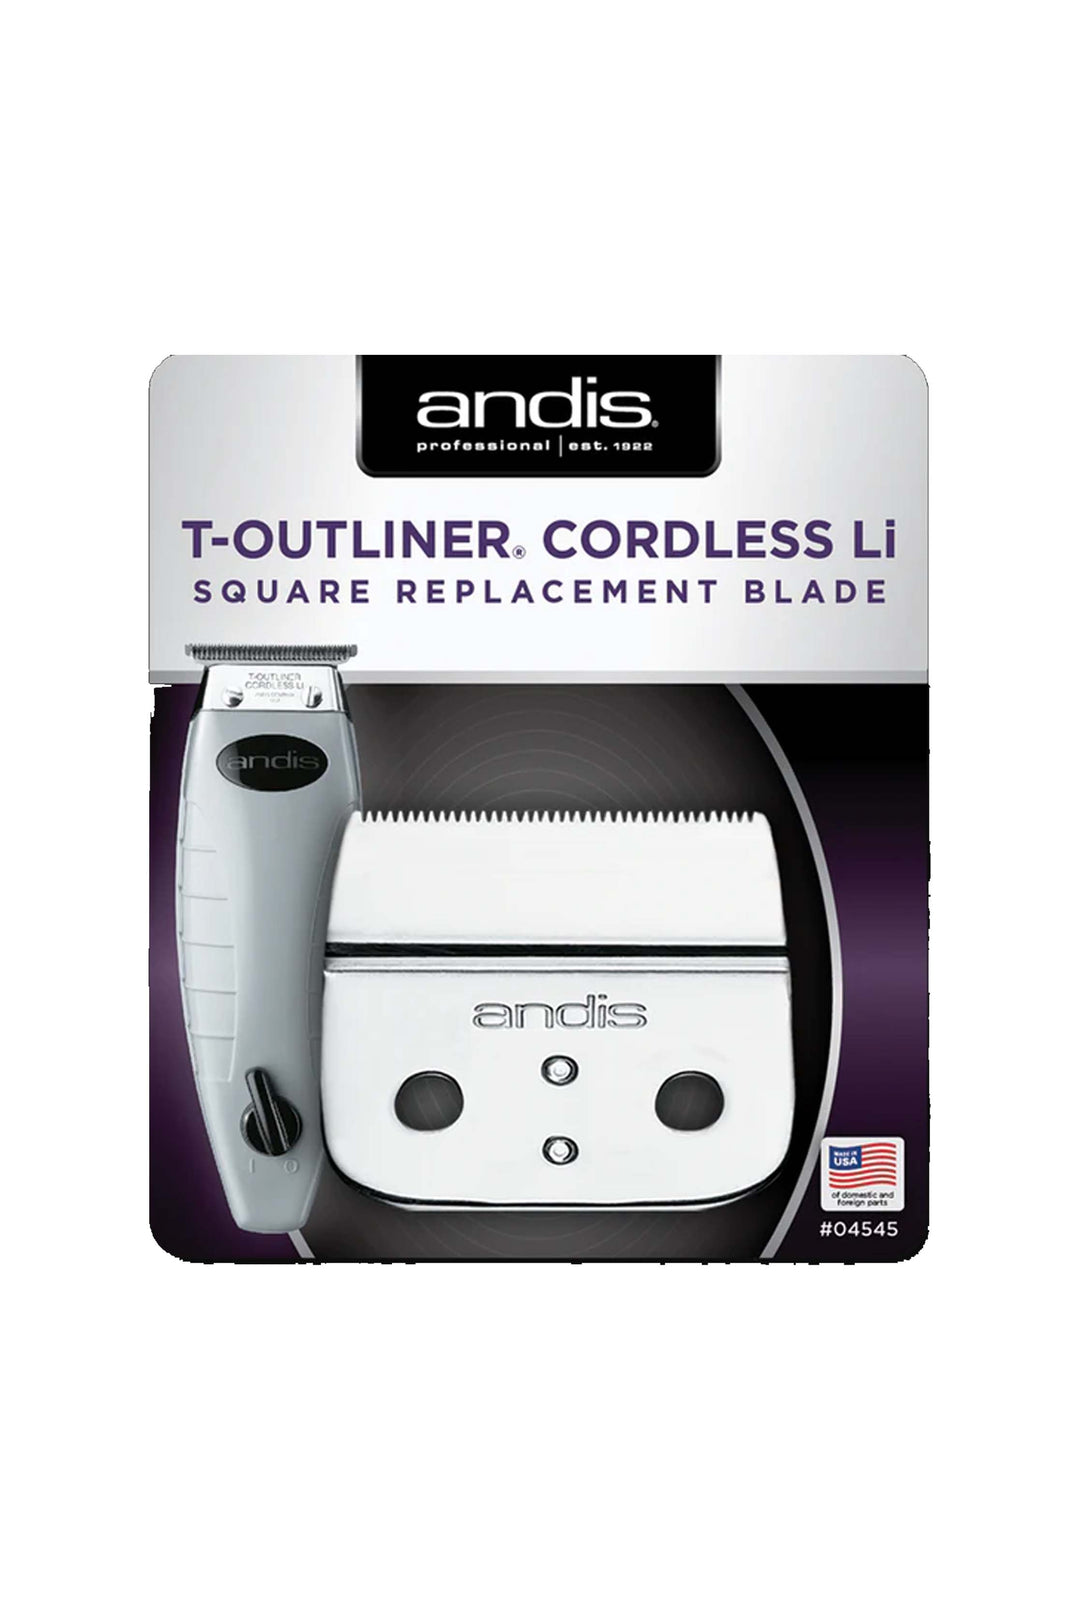 ANDIS T-OUTLINER CORDLESS LI SQUARE REPLACEMENT BLADE